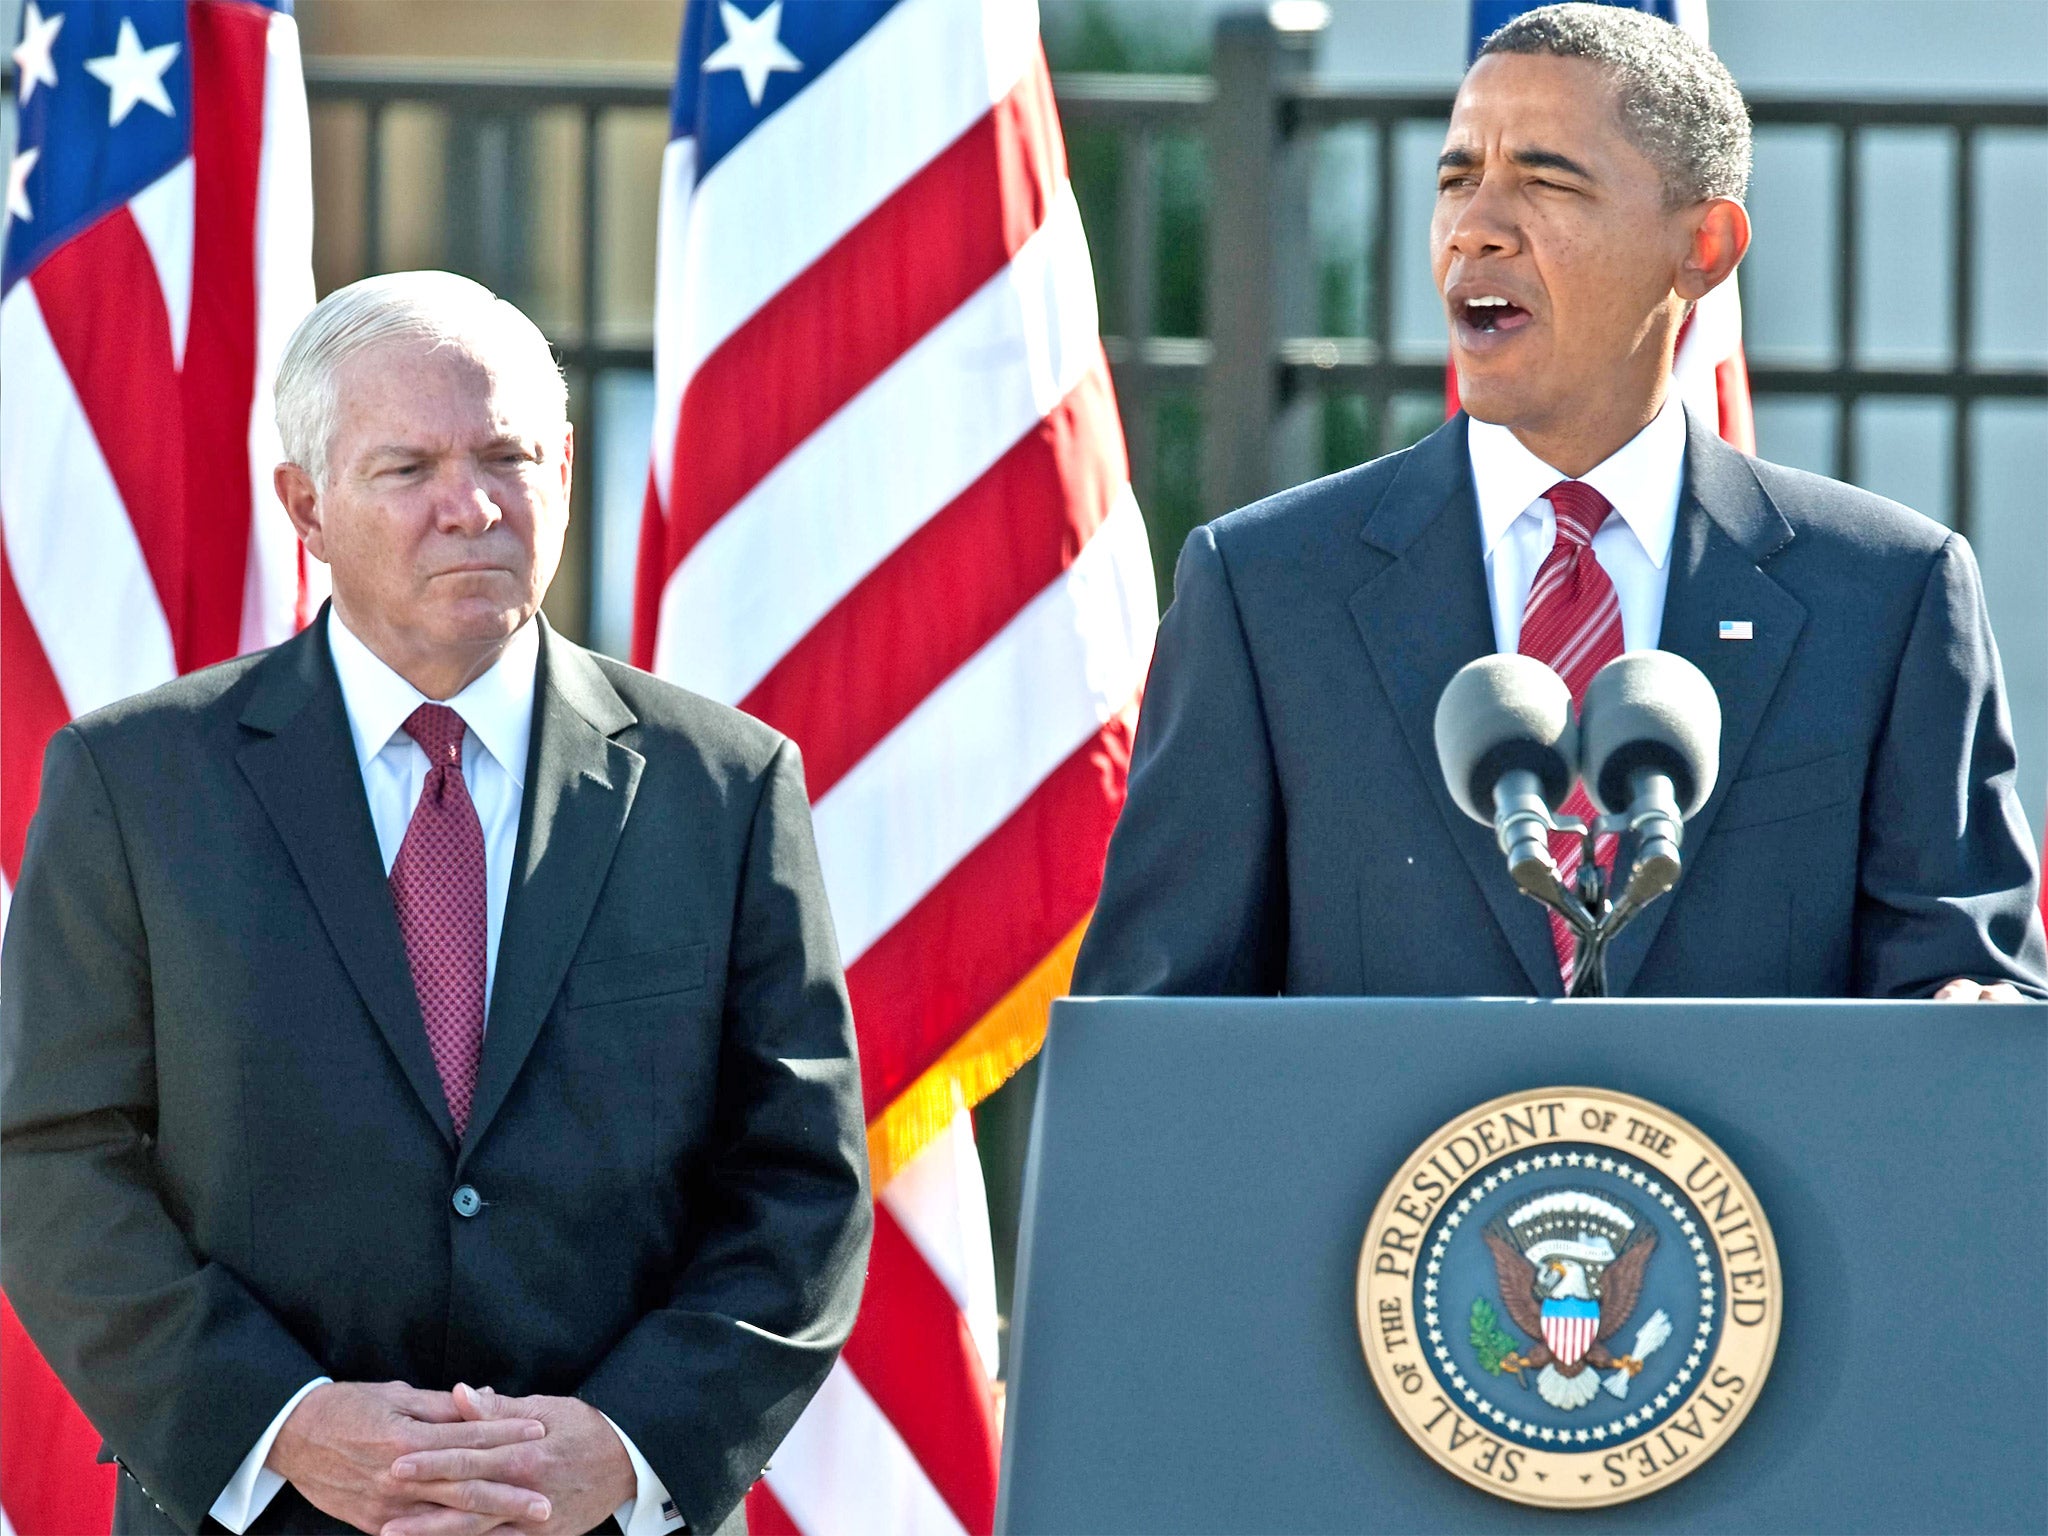 Barack Obama speaks, flanked by Defence Secretary Robert Gates, at a memorial service for the victims of the September 11 attacks on the Pentagon